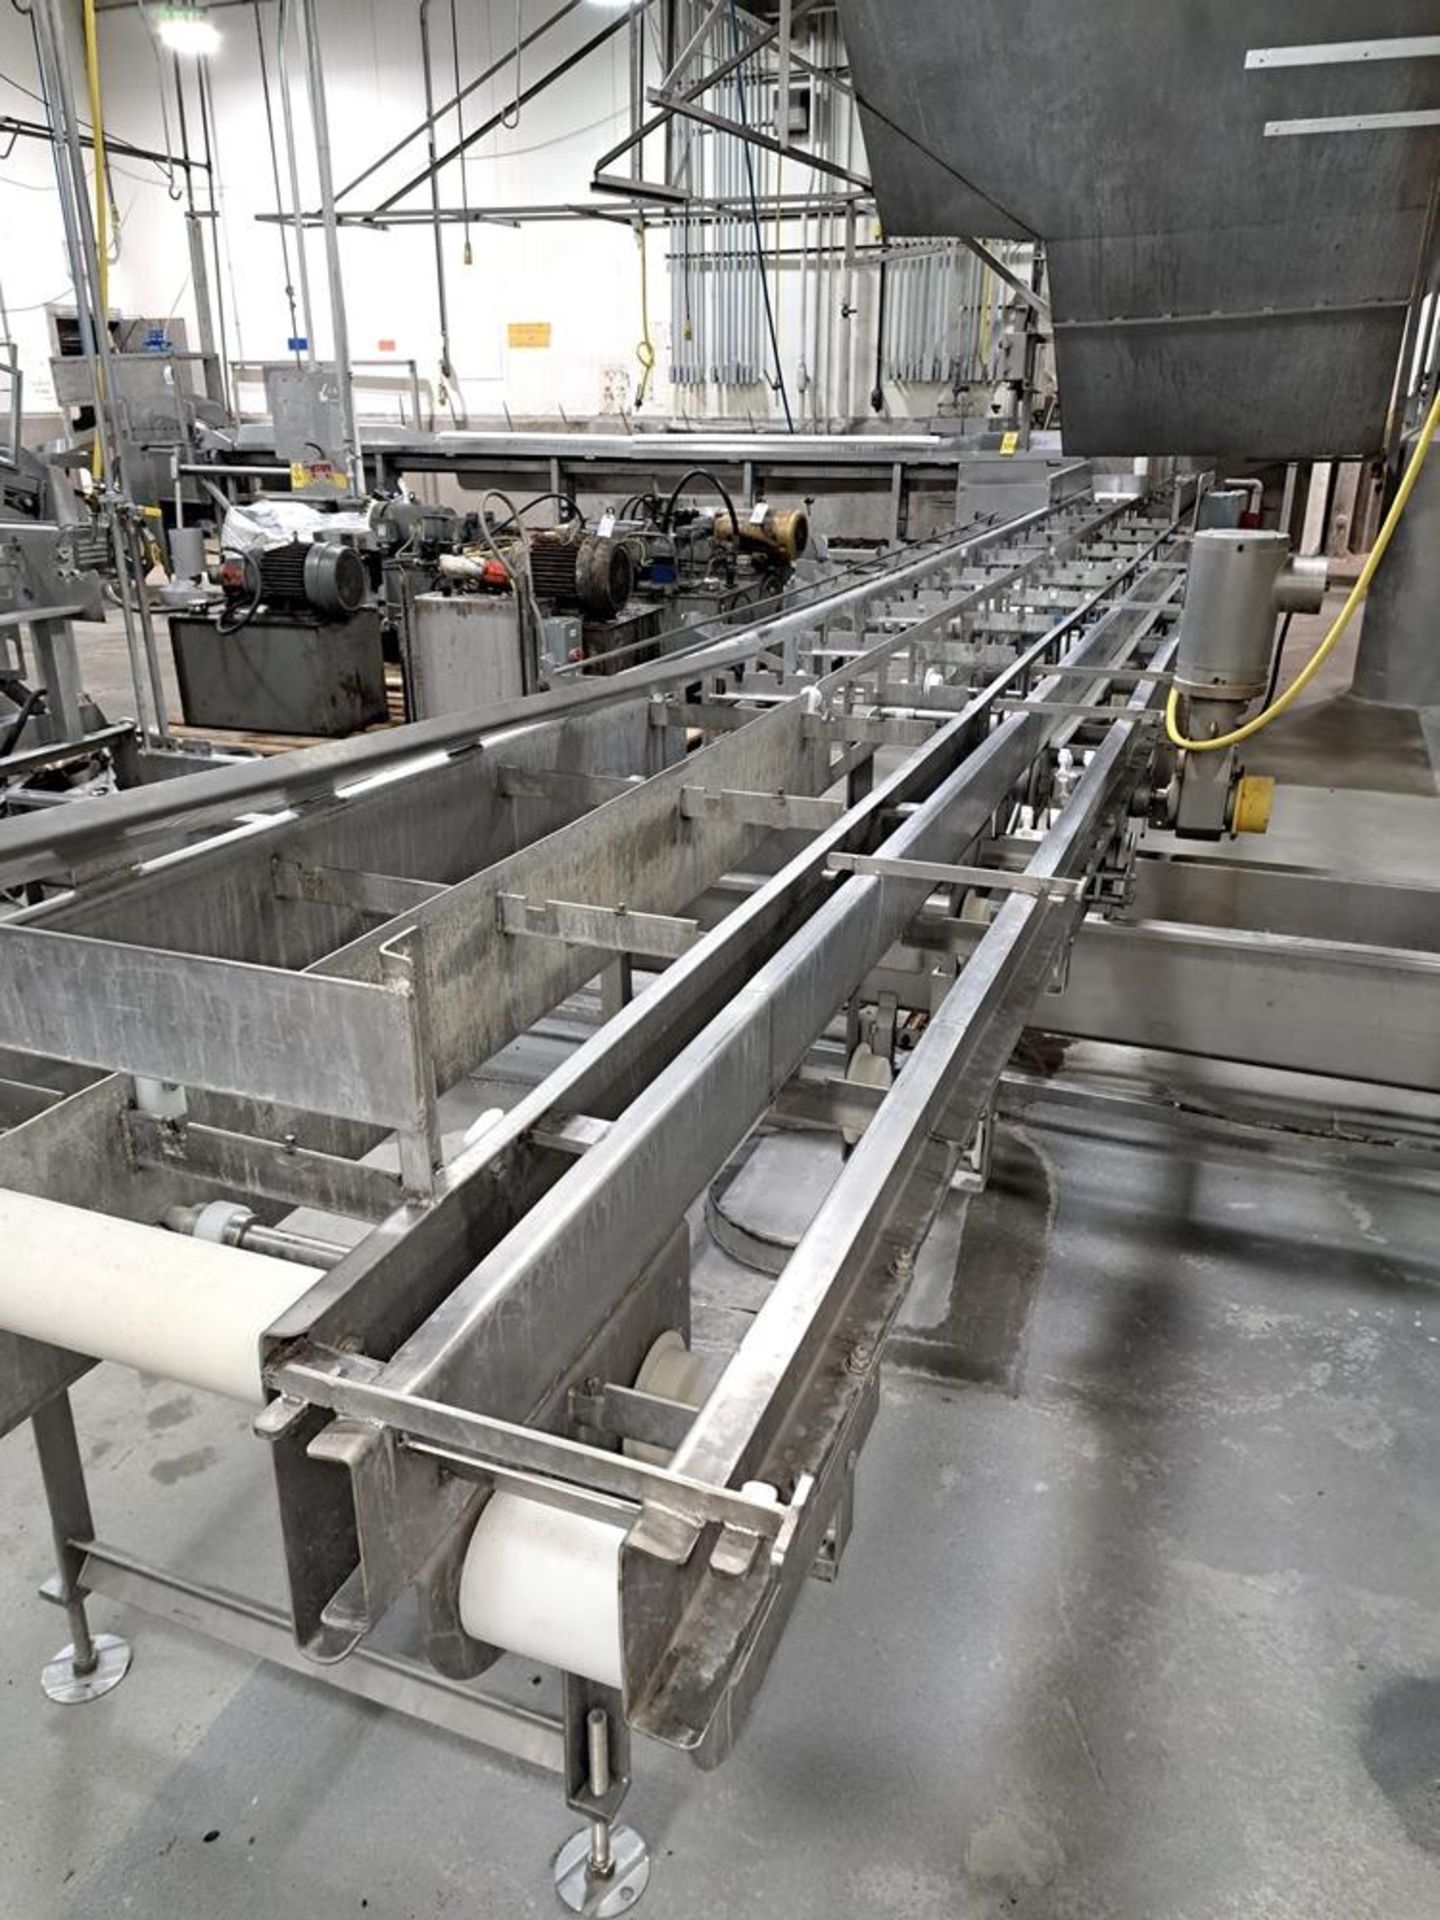 Stainless Steel Double Conveyor, 28" W X 50' L, 8" W X 30' L: Required Loading Fee $500.00, Rigger- - Image 3 of 5